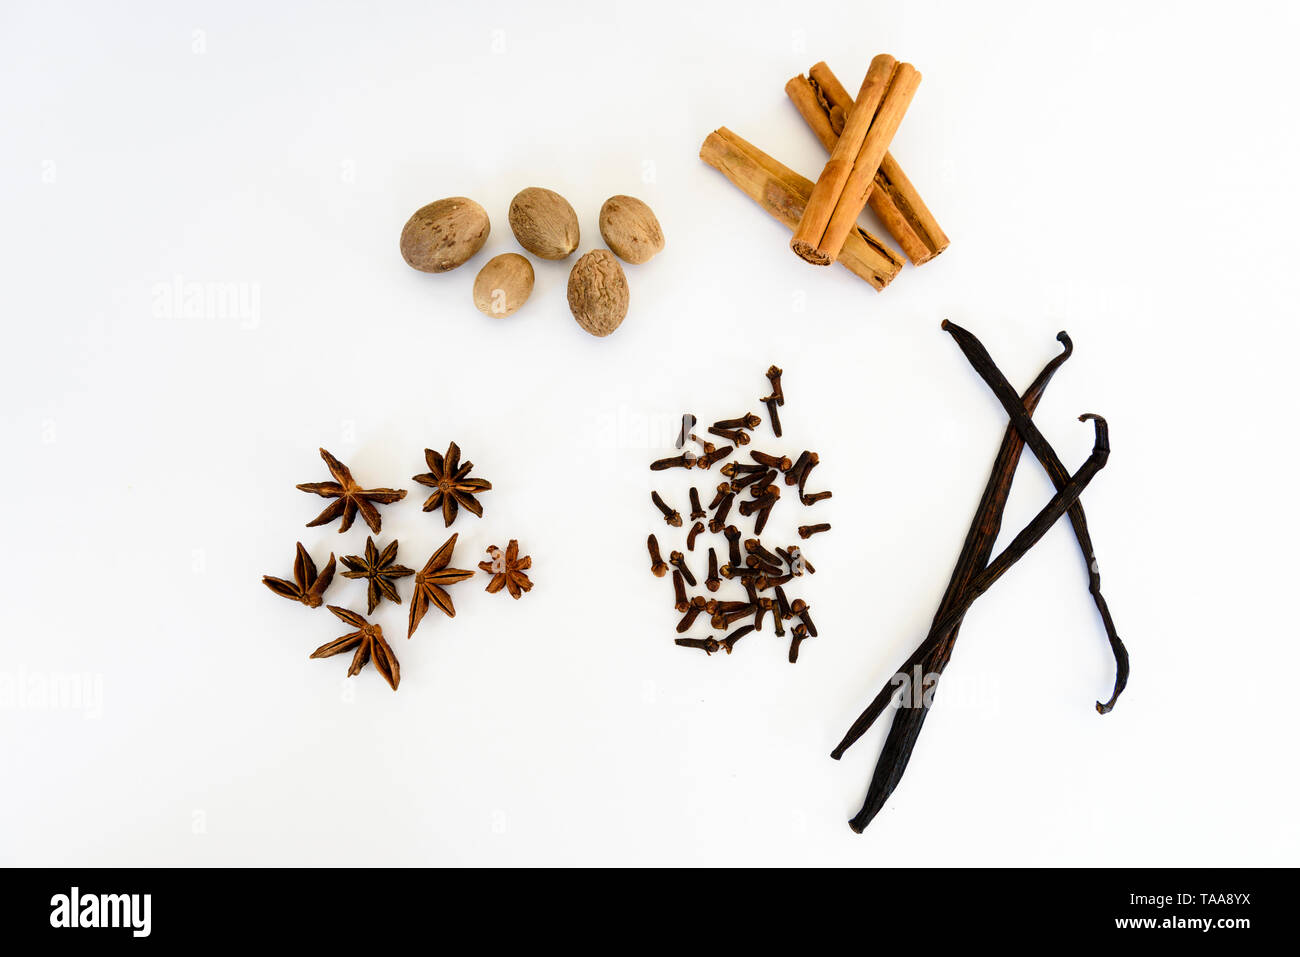 Spices Often Used In Christmas Baking Whole Nutmeg Cinnamon Sticks Cloves Star Anise And Vanilla Beans Flat Lay Cut Out On White Stock Photo Alamy,How To Change A Light Socket On A Floor Lamp